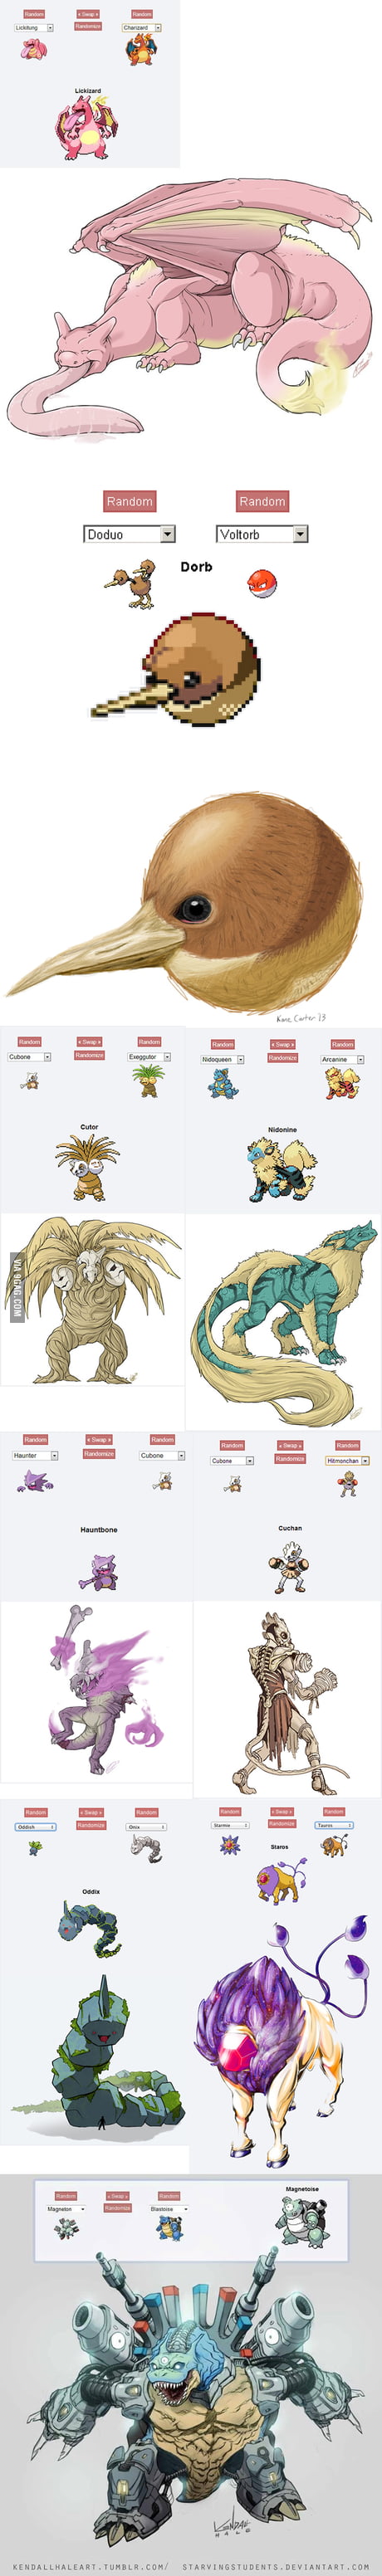 Given the disappointment surrounding Pokemon Sword/Shield, figured I'd make  this comparison - 9GAG